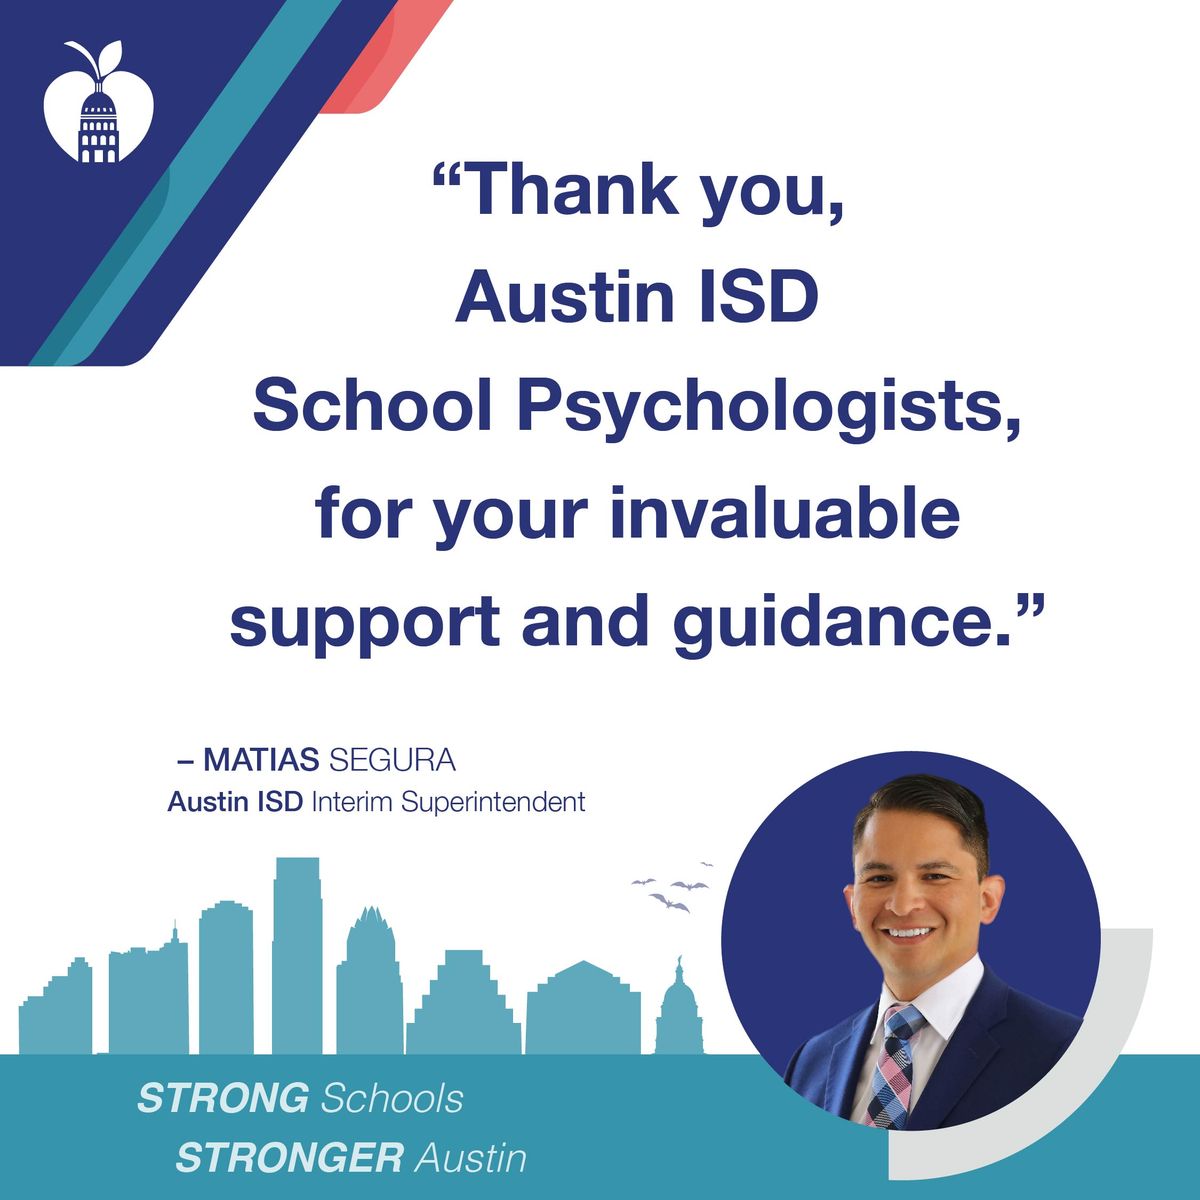 Thank you, Austin ISD School Psychologists for your invaluable support and guidance.